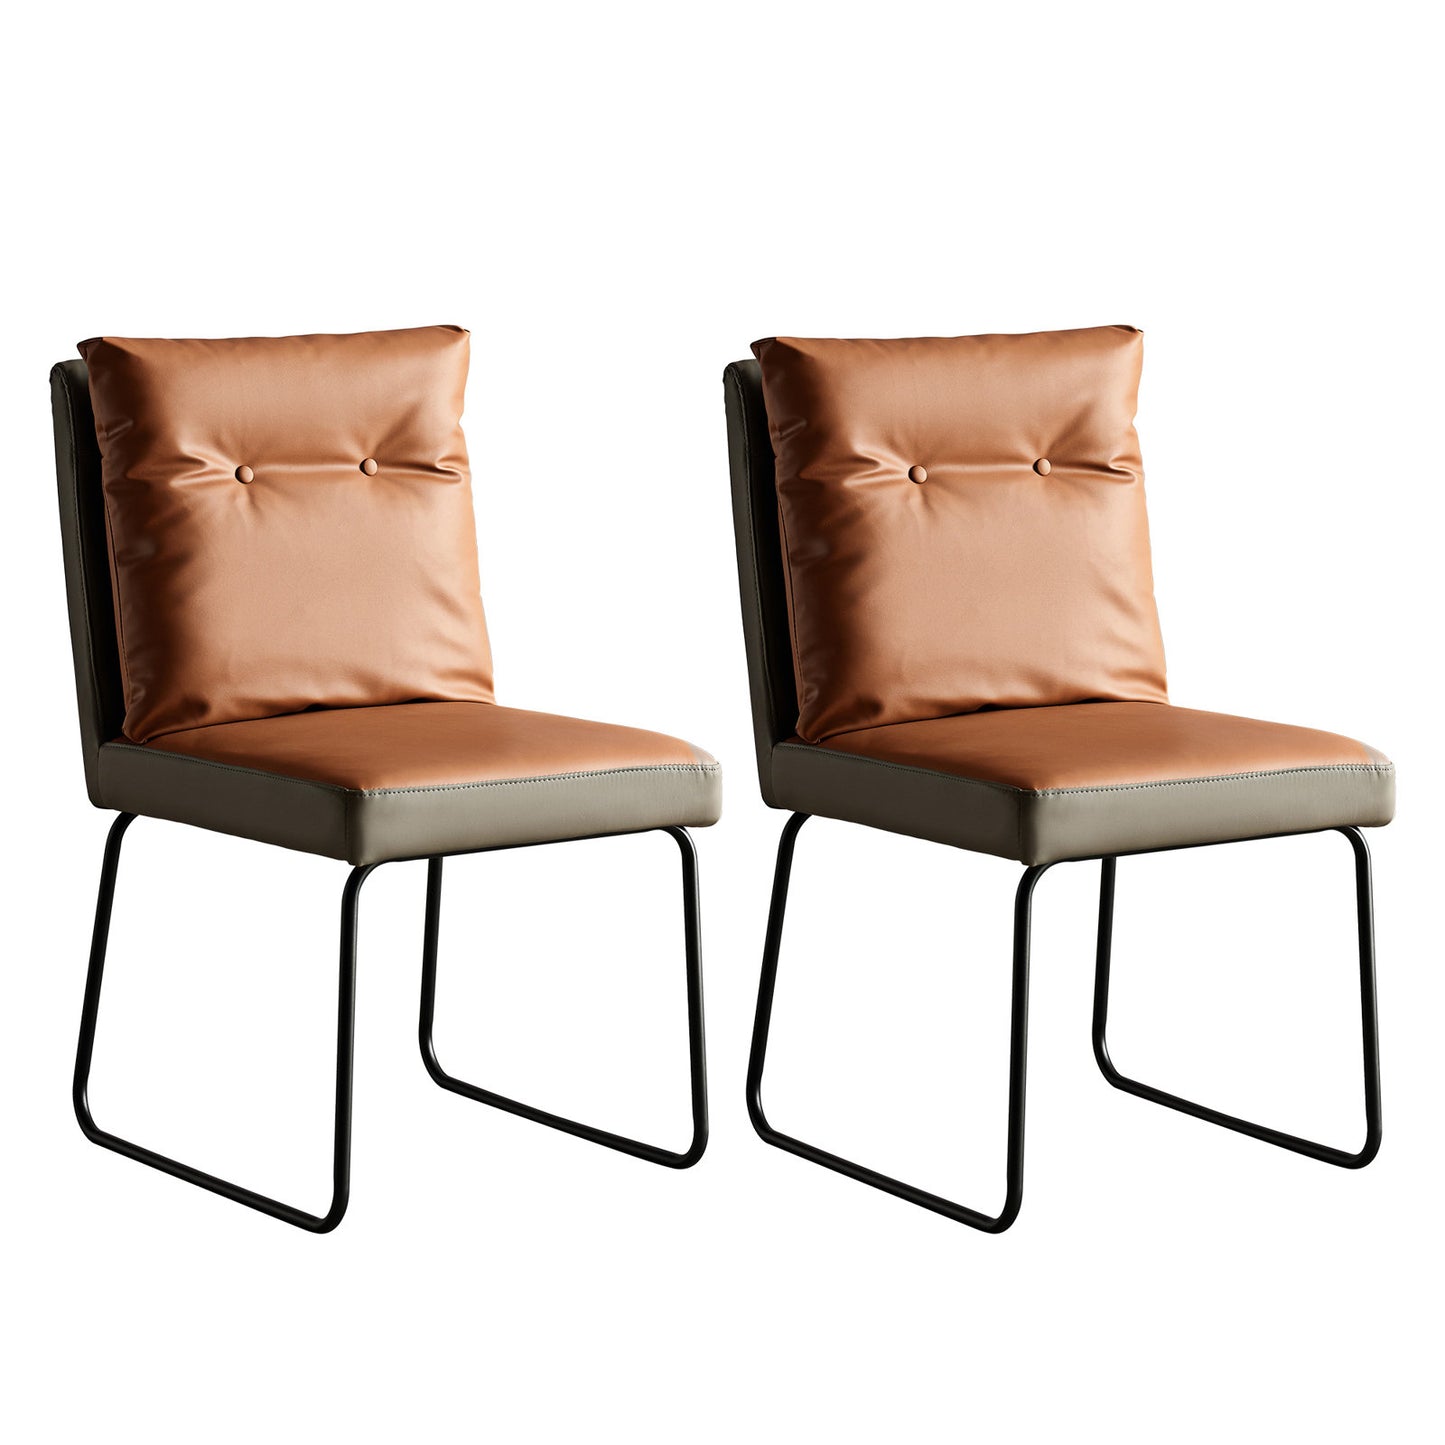 Mid-Century Modern Orange Upholstered Dining Chairs PU Leather Set of 2